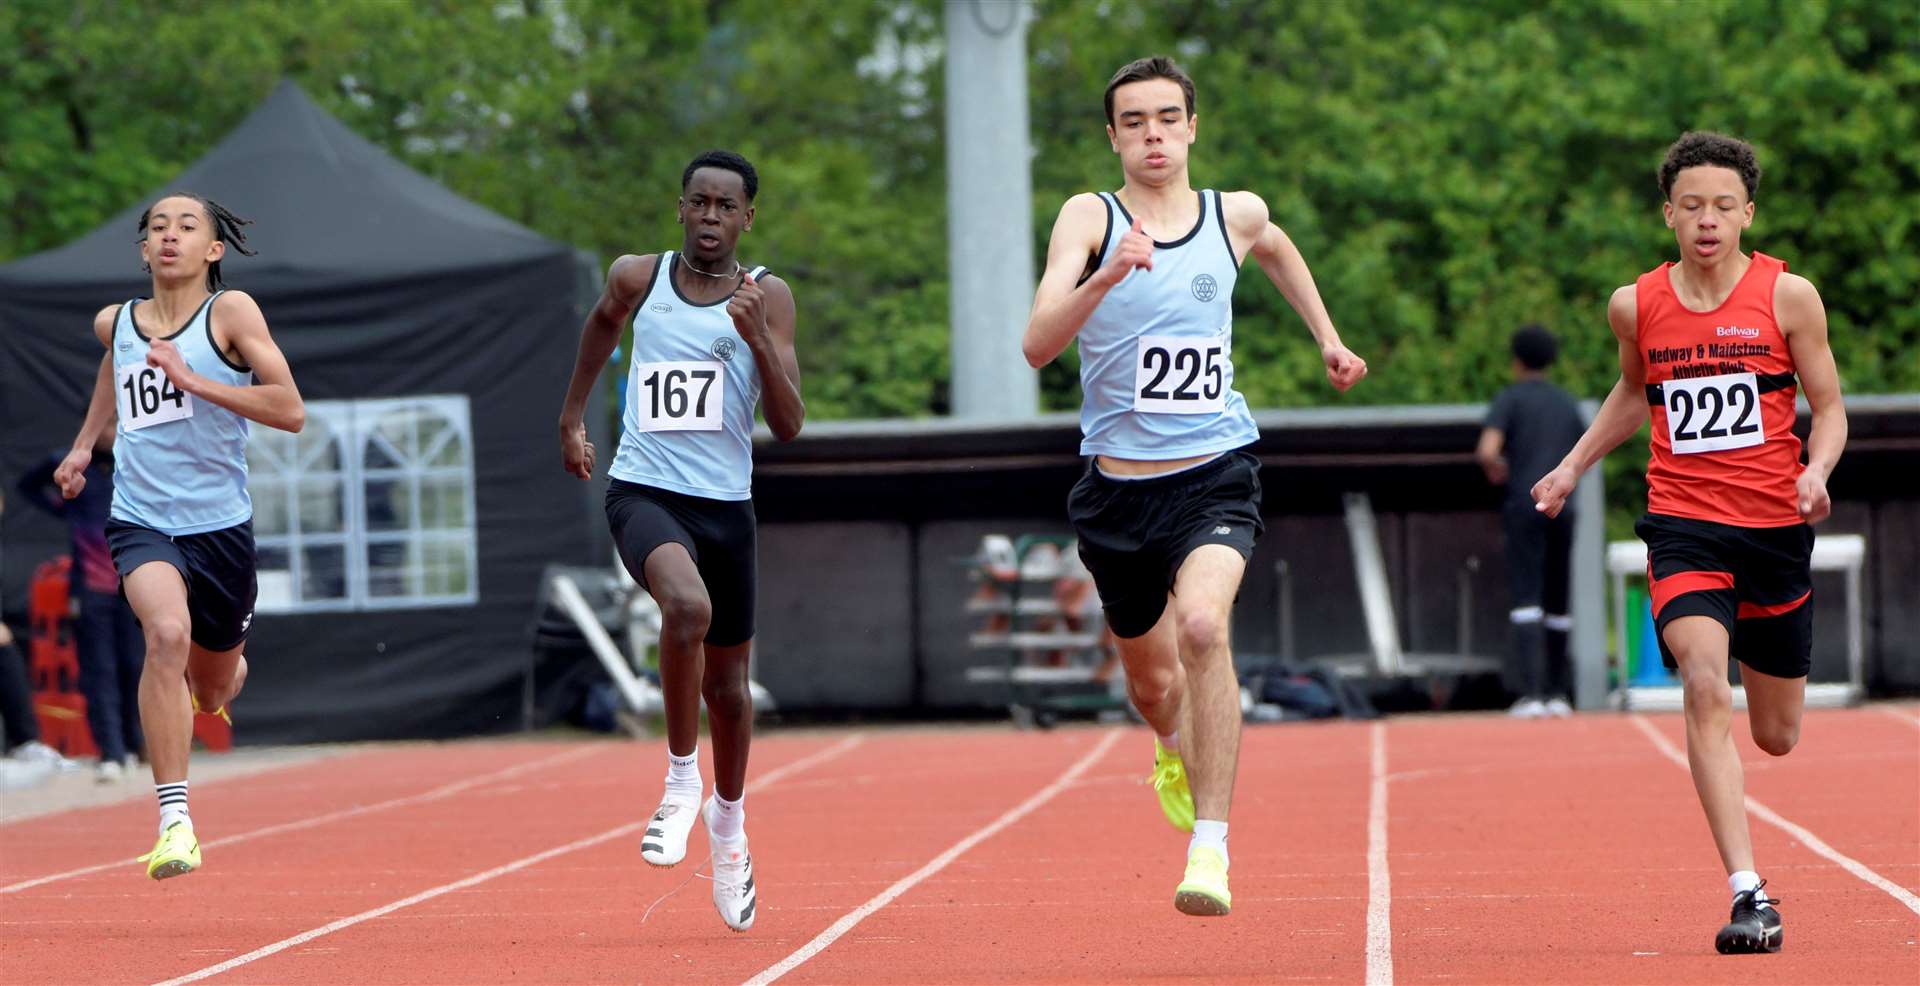 From left: Rhys Joyeux (fourth), Elijah Olaleye (third), Joshua Wellings (winner) and Lucas Cameron (second) in the under-15 boys’ 300m final. Picture: Barry Goodwin